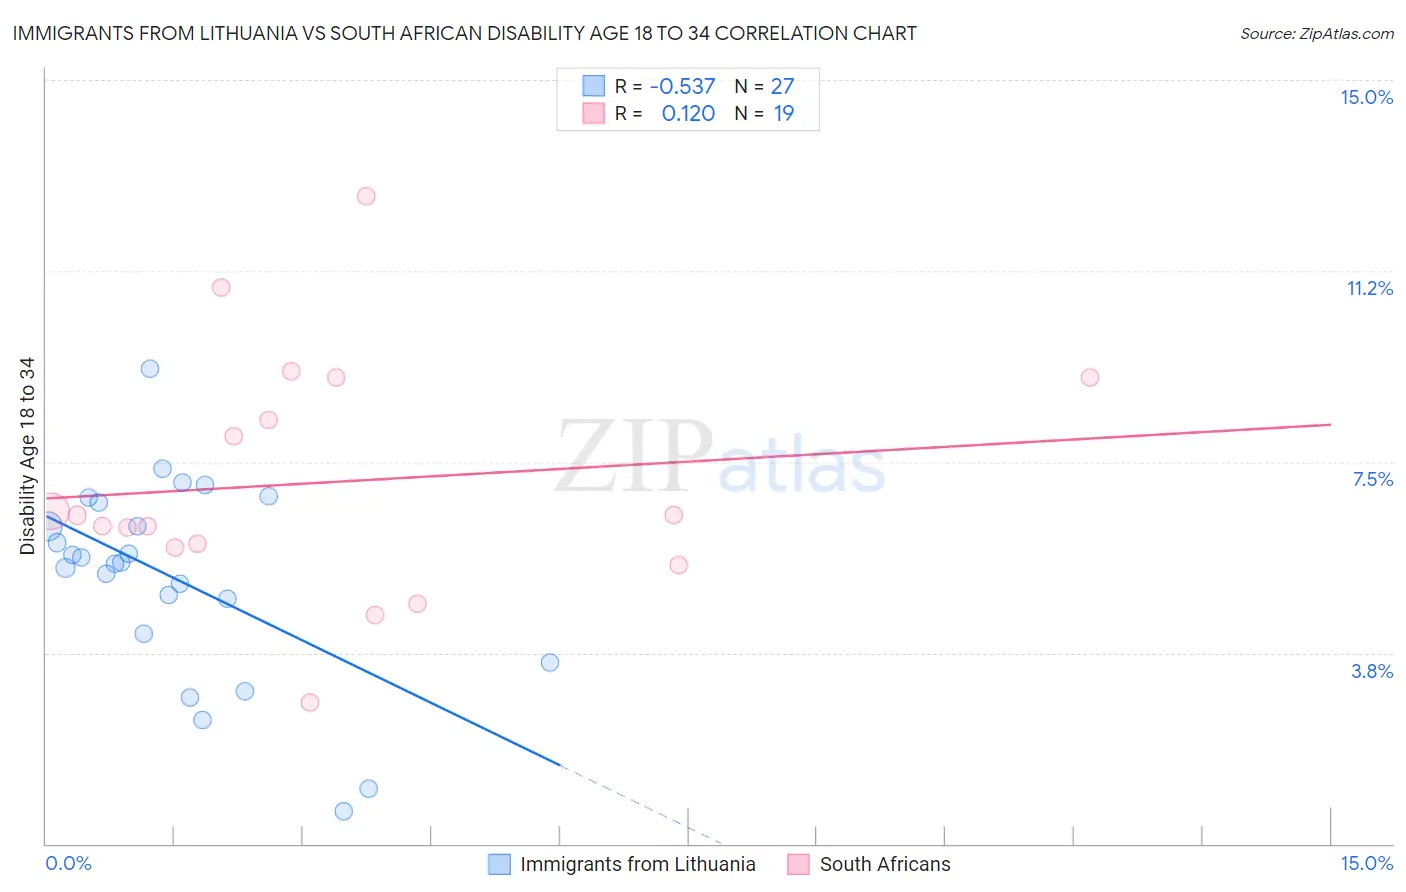 Immigrants from Lithuania vs South African Disability Age 18 to 34